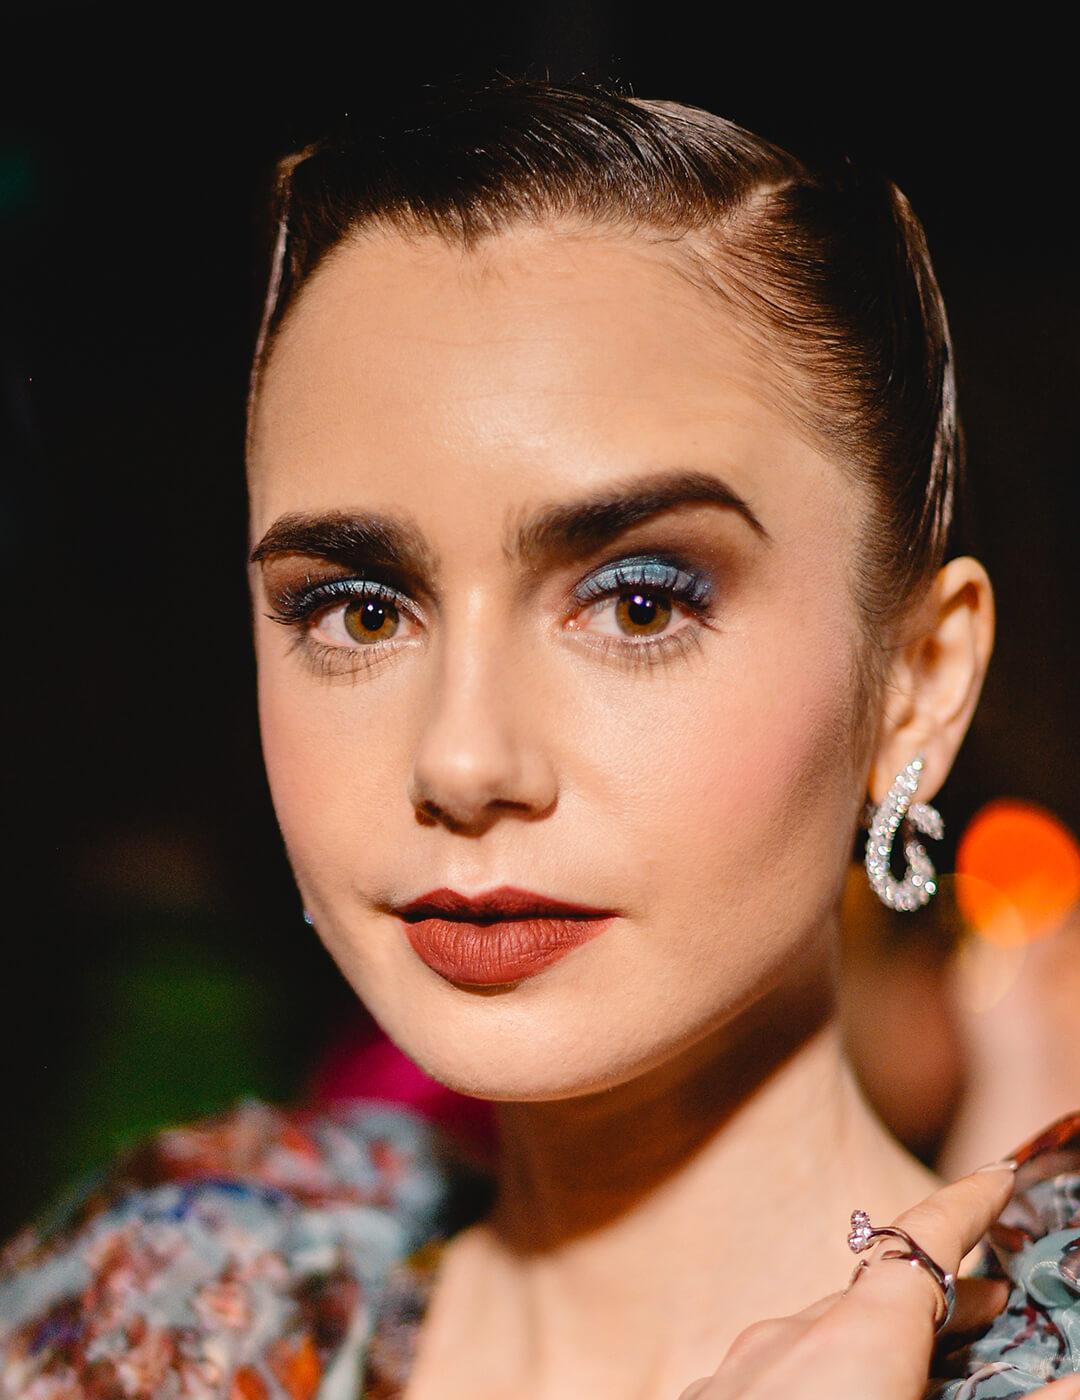 Lily Collins looking glam in a sleek hairstyle, blue smoky eyeshadow makeup look, and floral dress